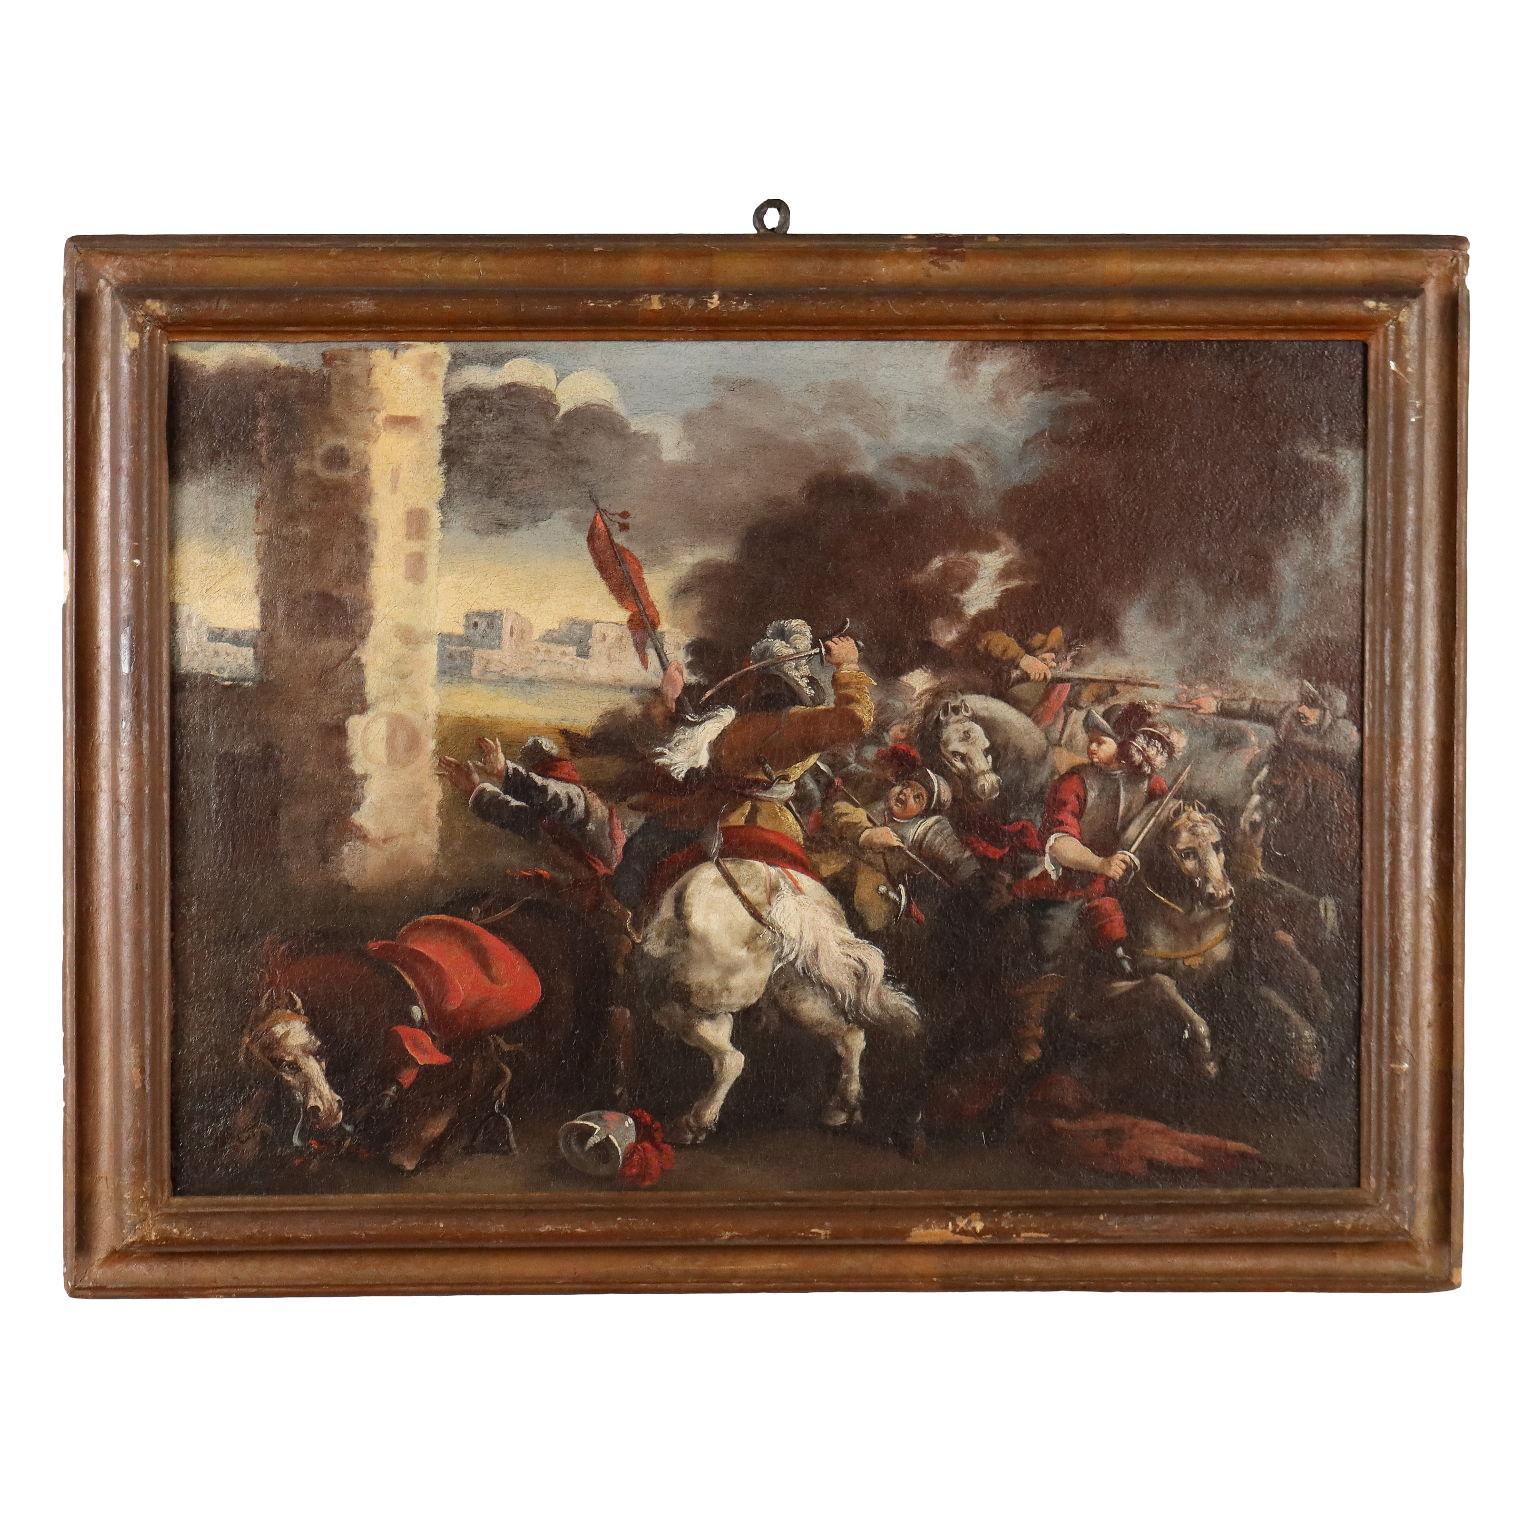 Unknown Figurative Painting - Painting with Scene of Battle 18th century